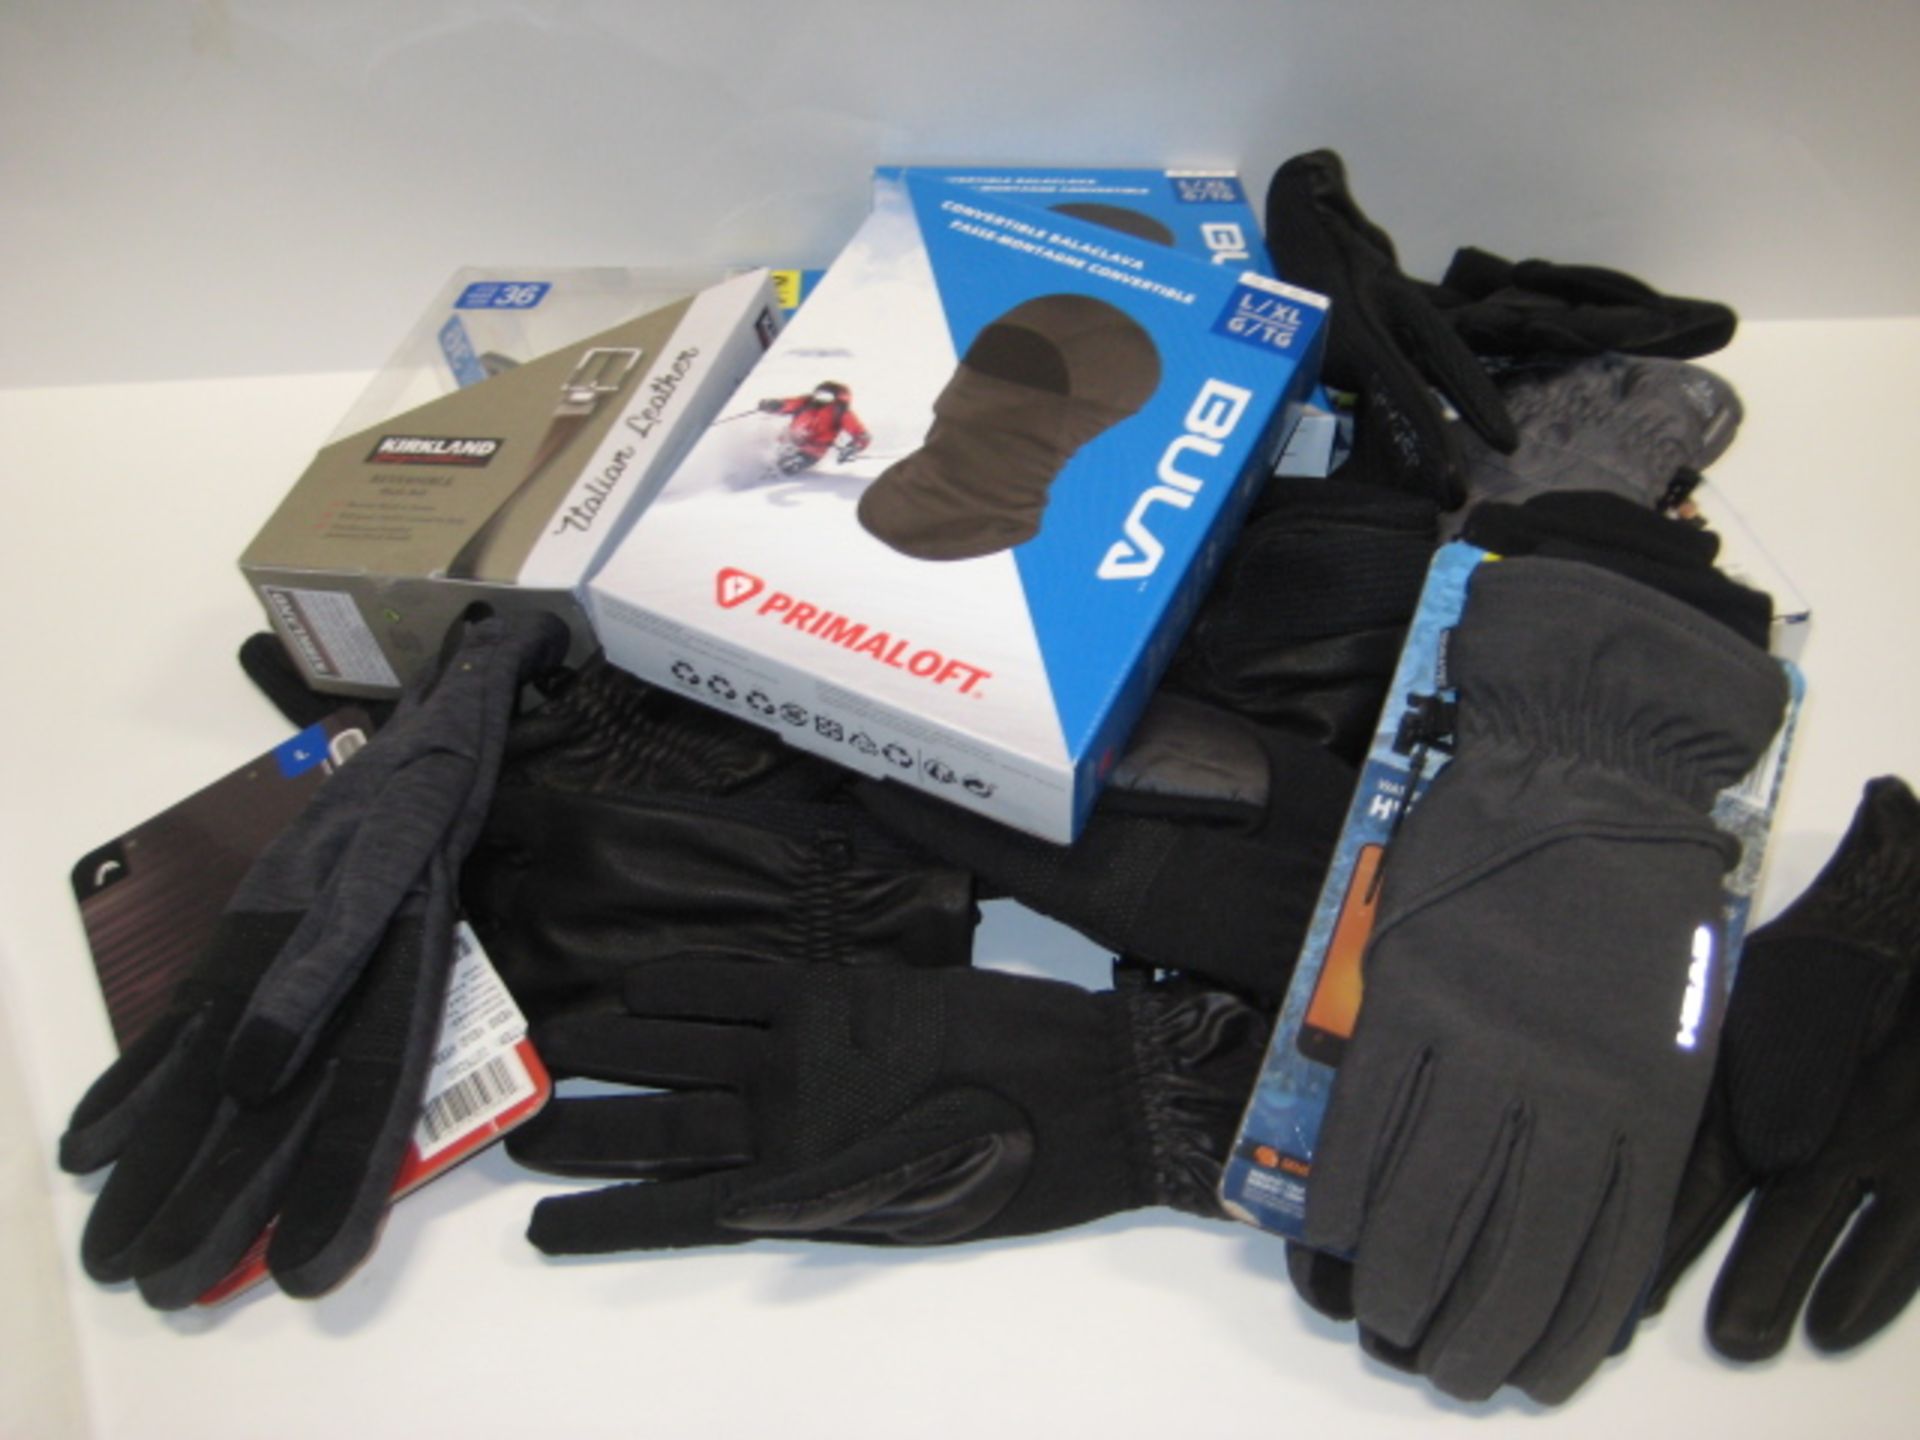 Bag containing boxed balaclava's, gloves, leather belt by Kirkland fitting thighs 36